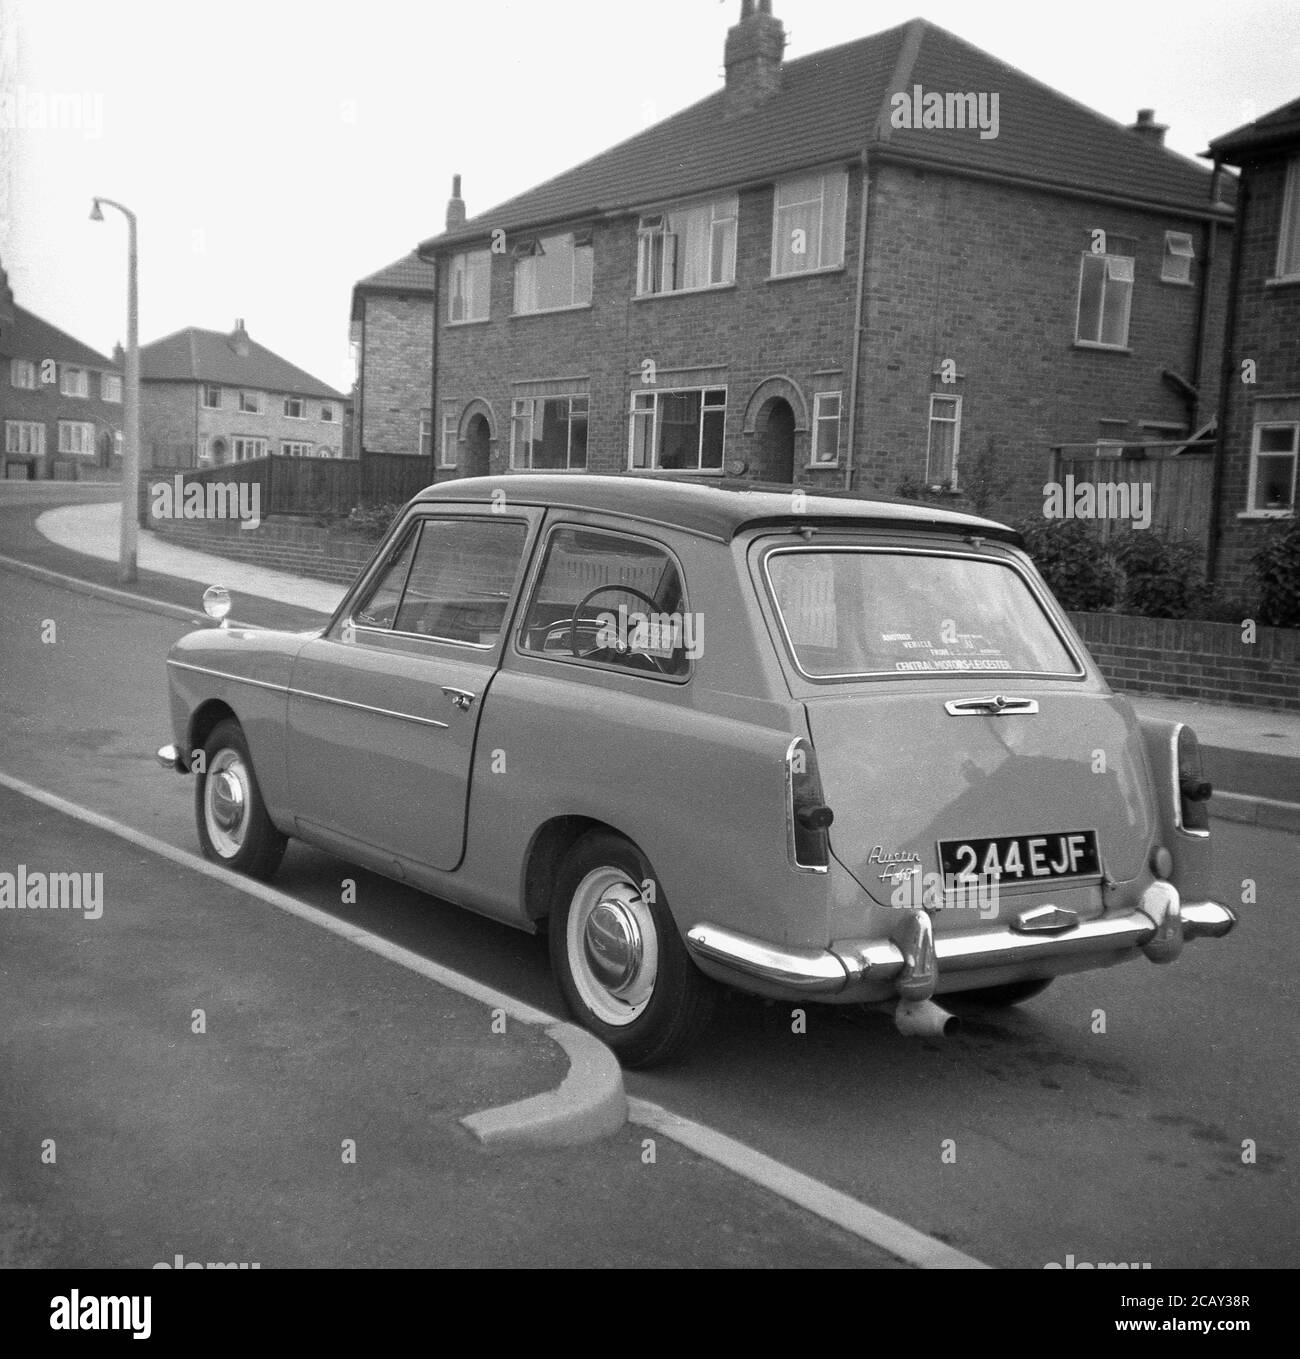 1960, historical, An Austin A40 Farina motorcar parked in a street on a new housing estate, England, UK. A small, economy car, made by the British Motor Coporation (BMC) it was named the Austin A40 Farina, reflecting the new design by the Italian 'Battista Farina's Pinin Farina Turin studio. The car shown here is the Mark 1 Saloon, made between 1958 and 1961. Stock Photo